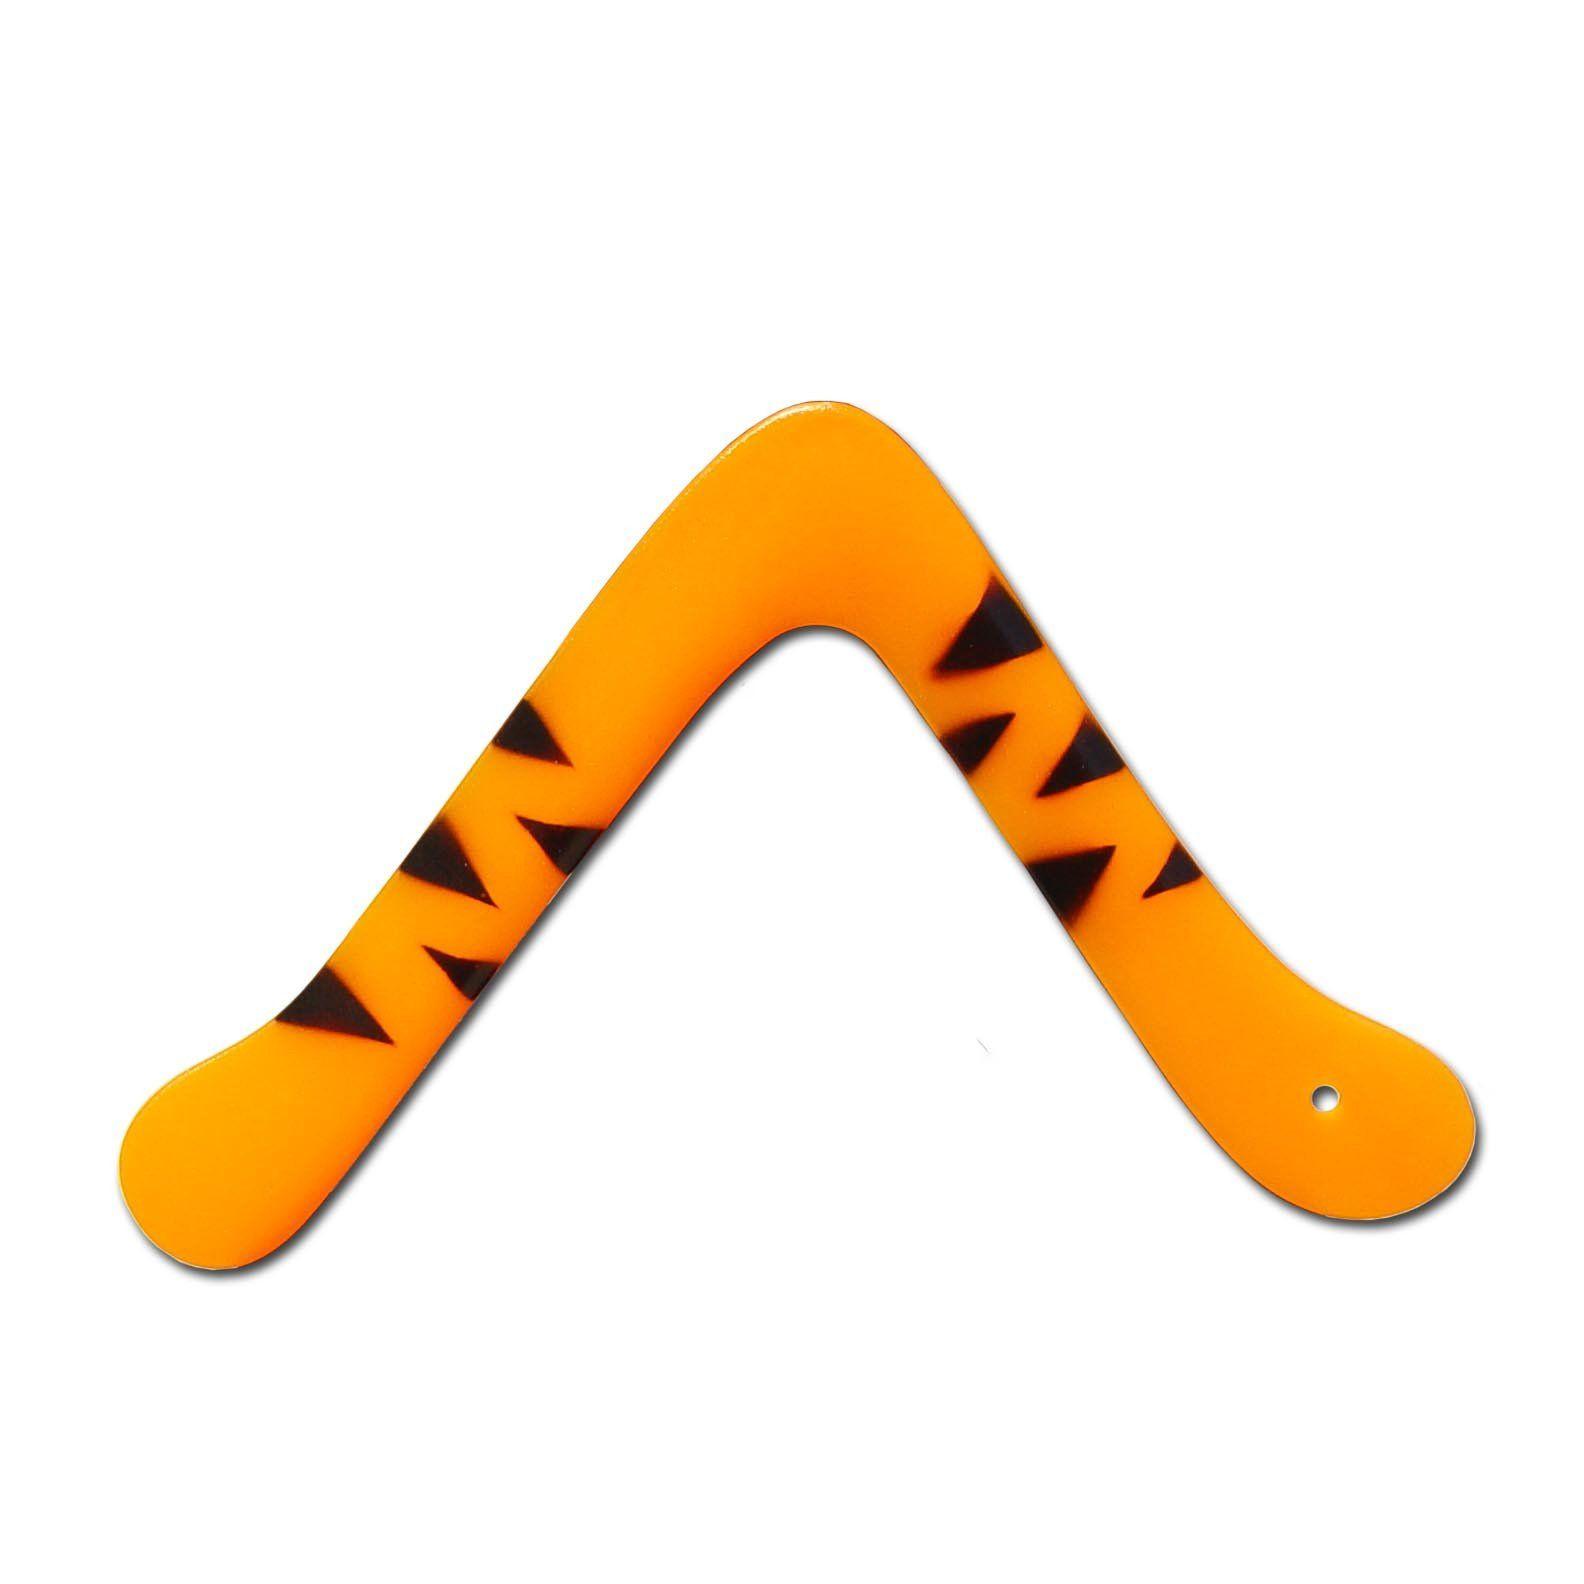 With Two Boomerangs Logo - Boomerangs.com a Boomerang and Learn How to Throw a Boomerang